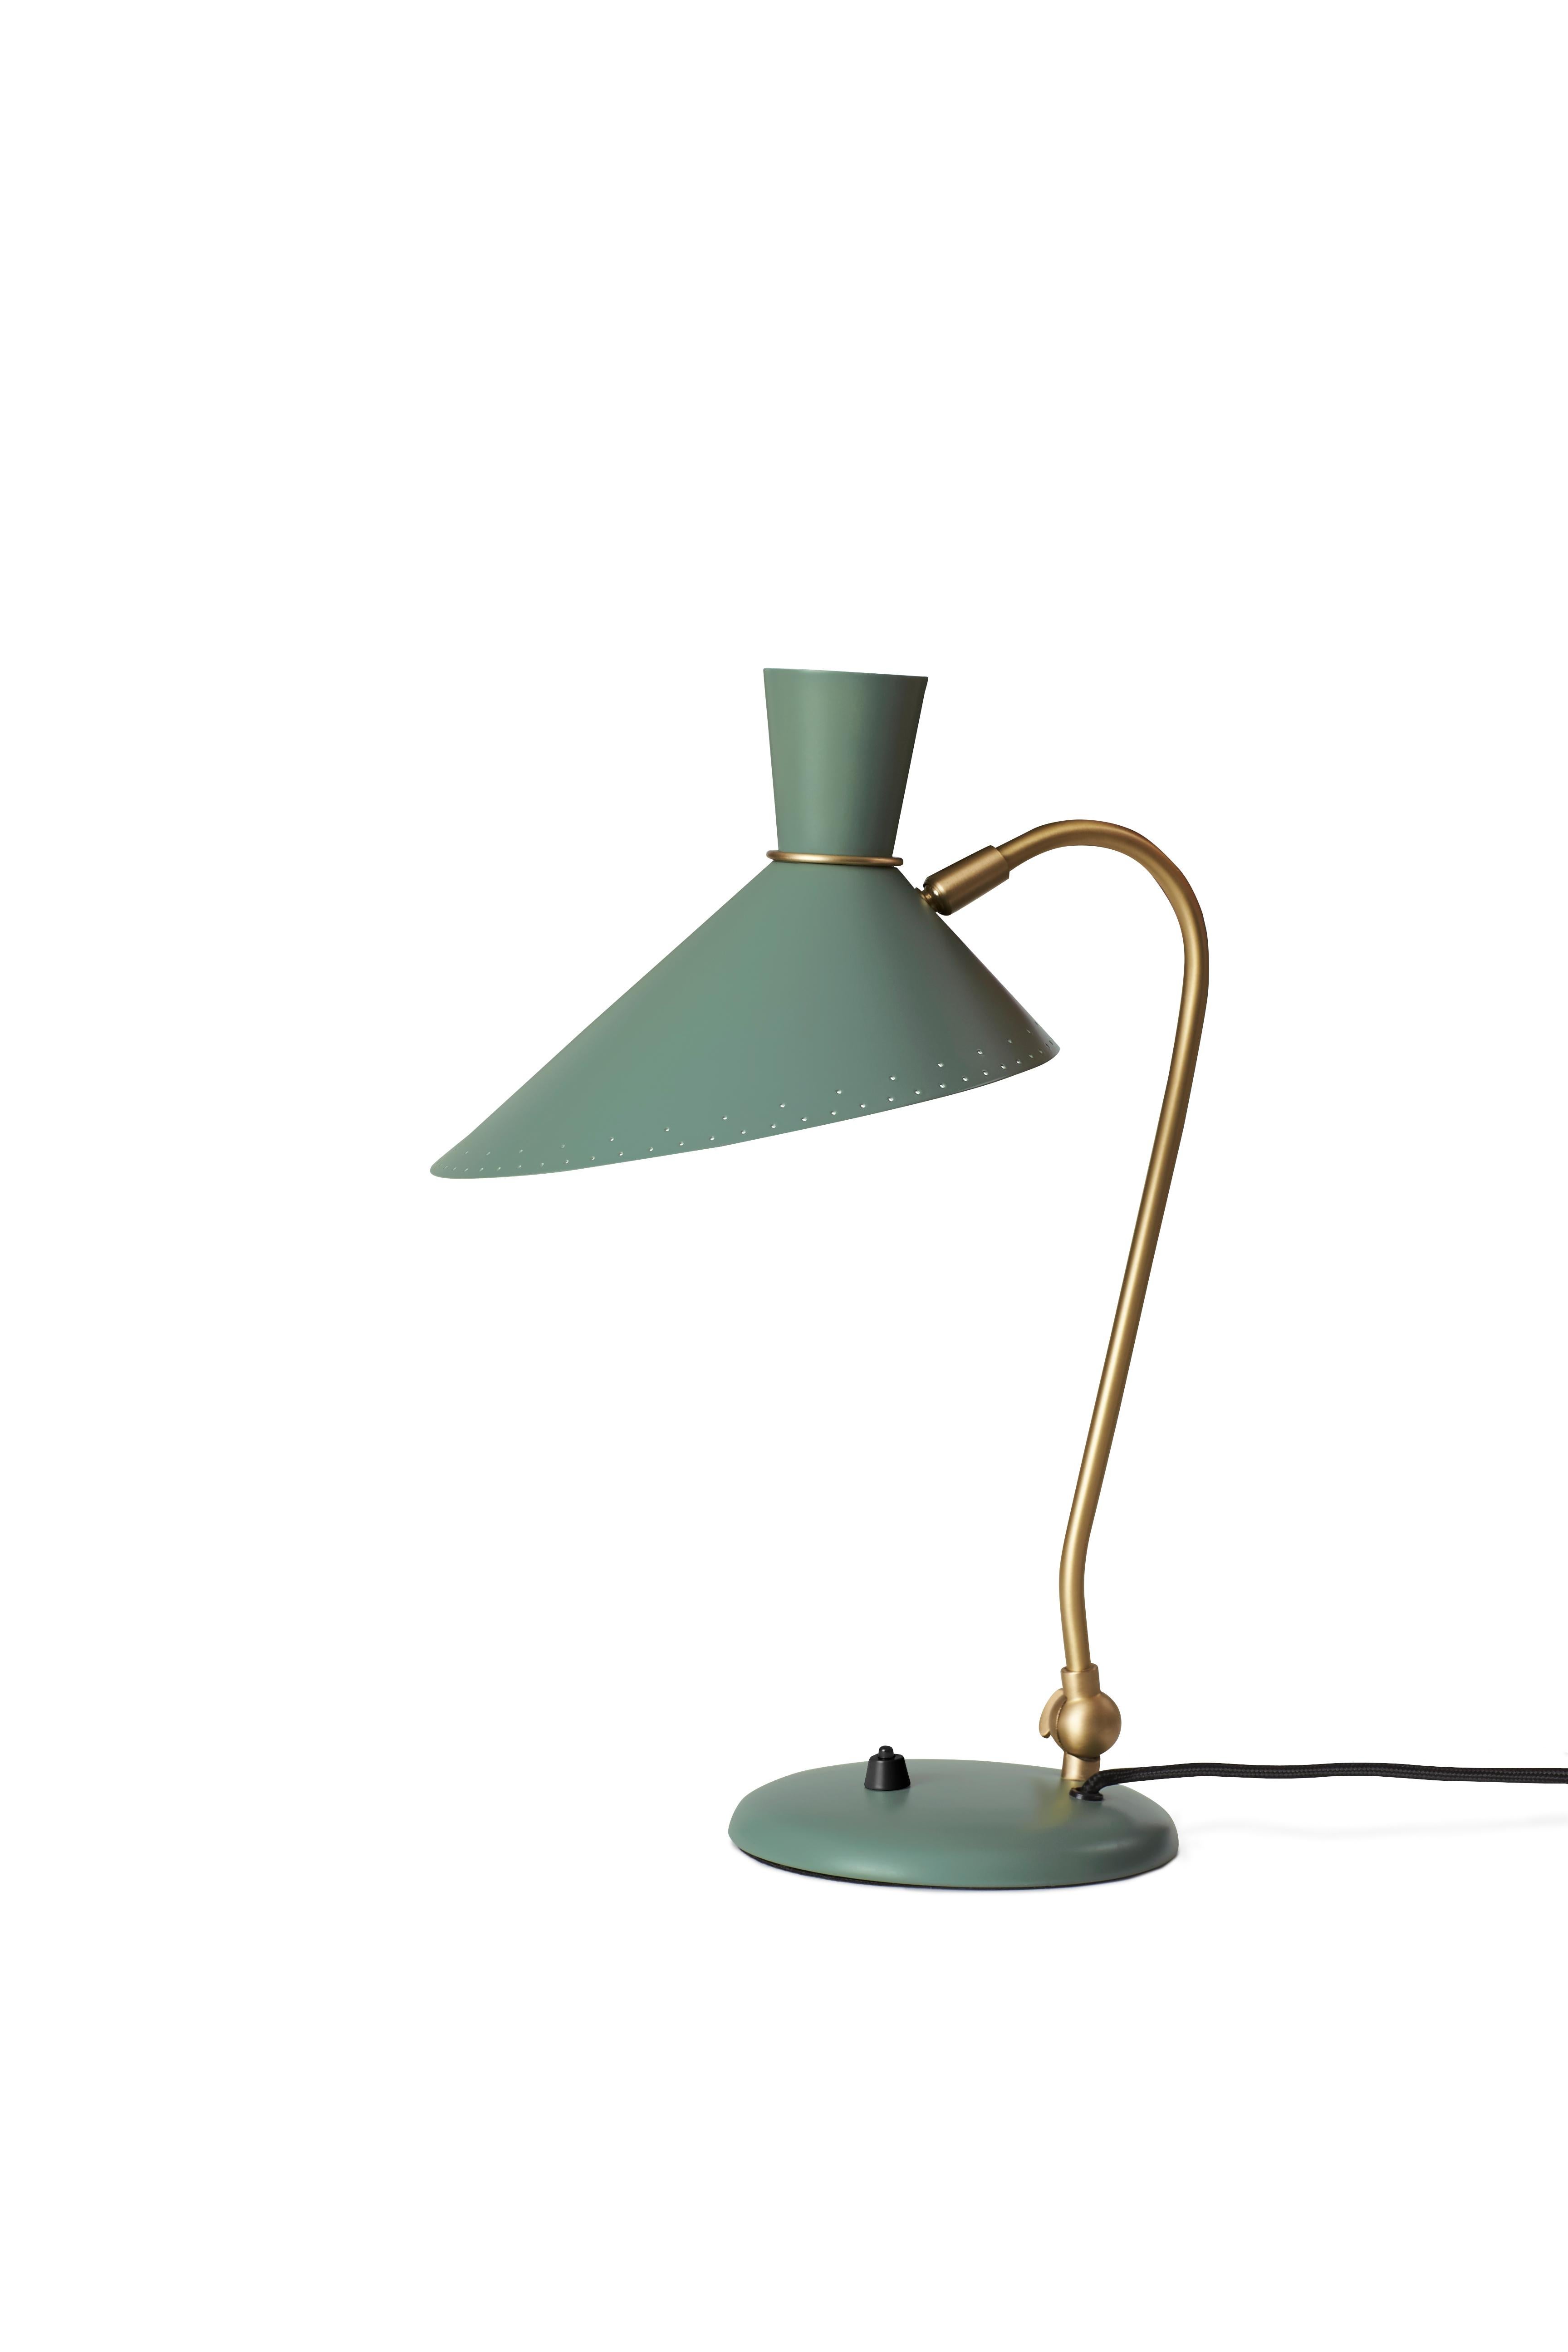 For Sale: Green (Dusty Green) Bloom Table Lamp, by Svend Aage Holm-Sørensen from Warm Nordic